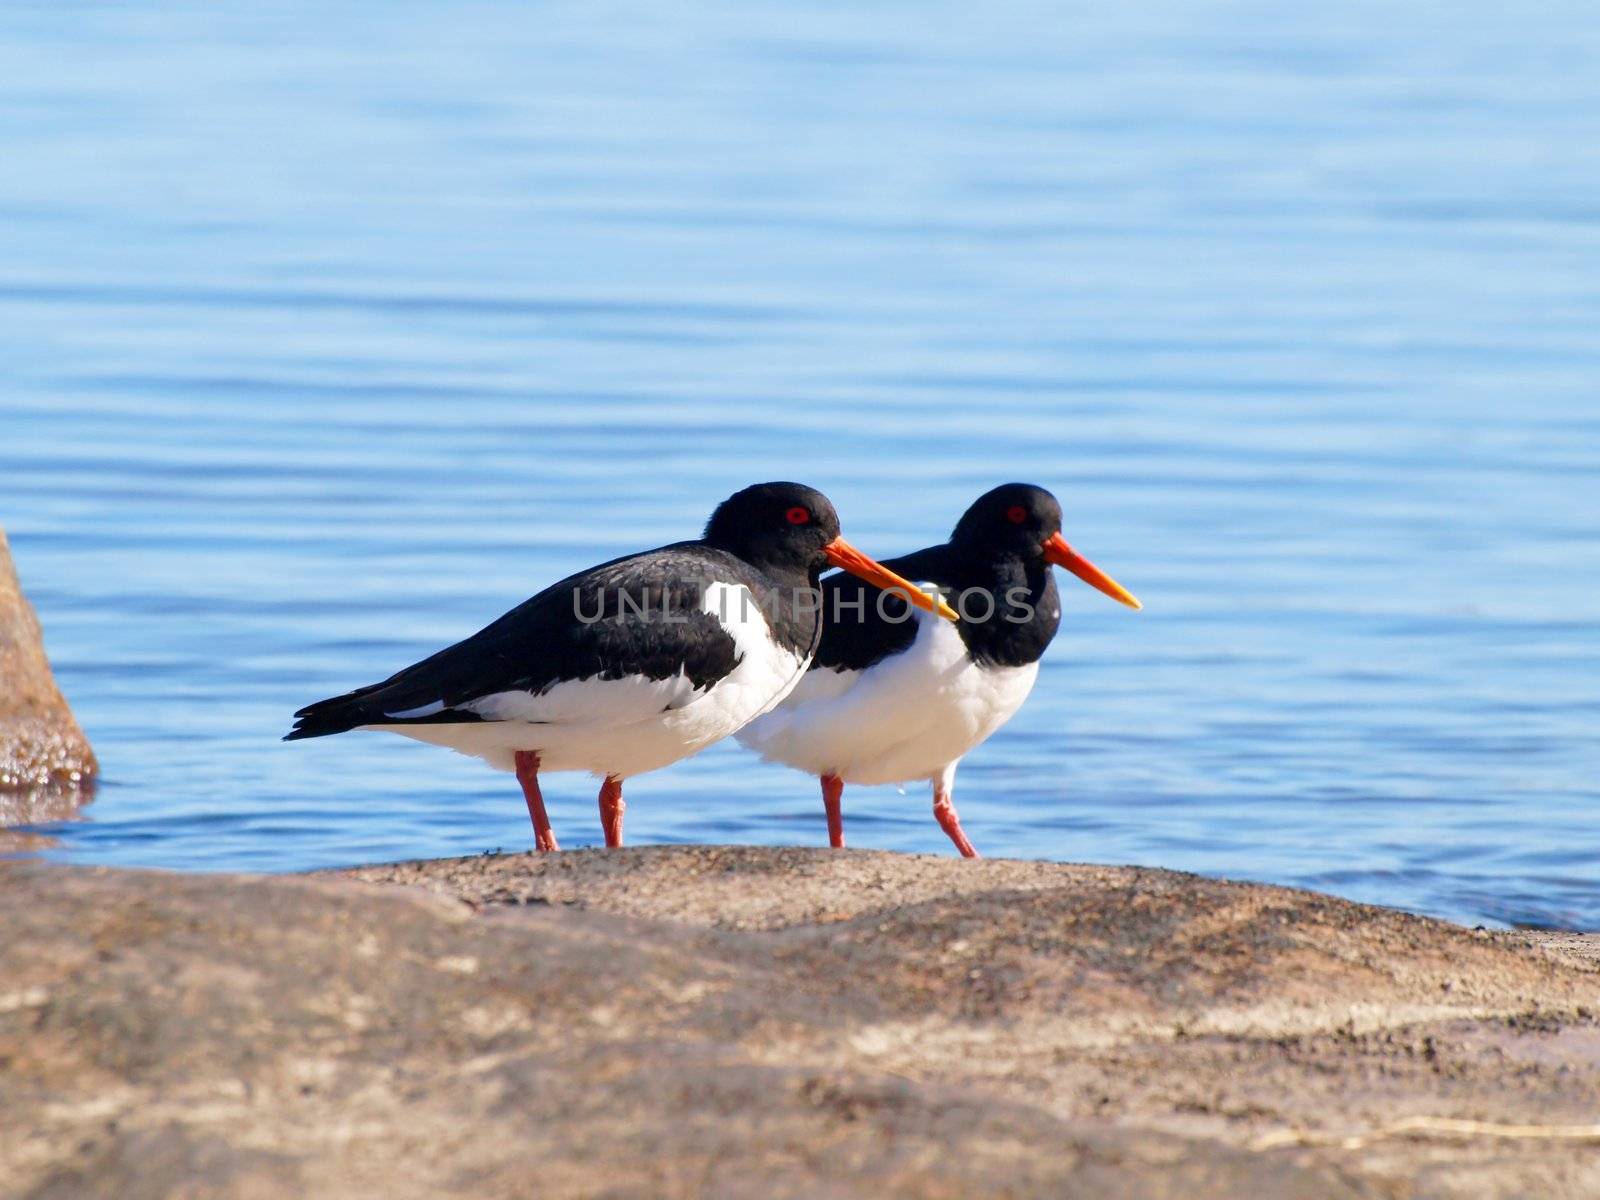 Couple of oystercatchers, from the family Haematopodidae, on a mountain next to the blue sea in the background